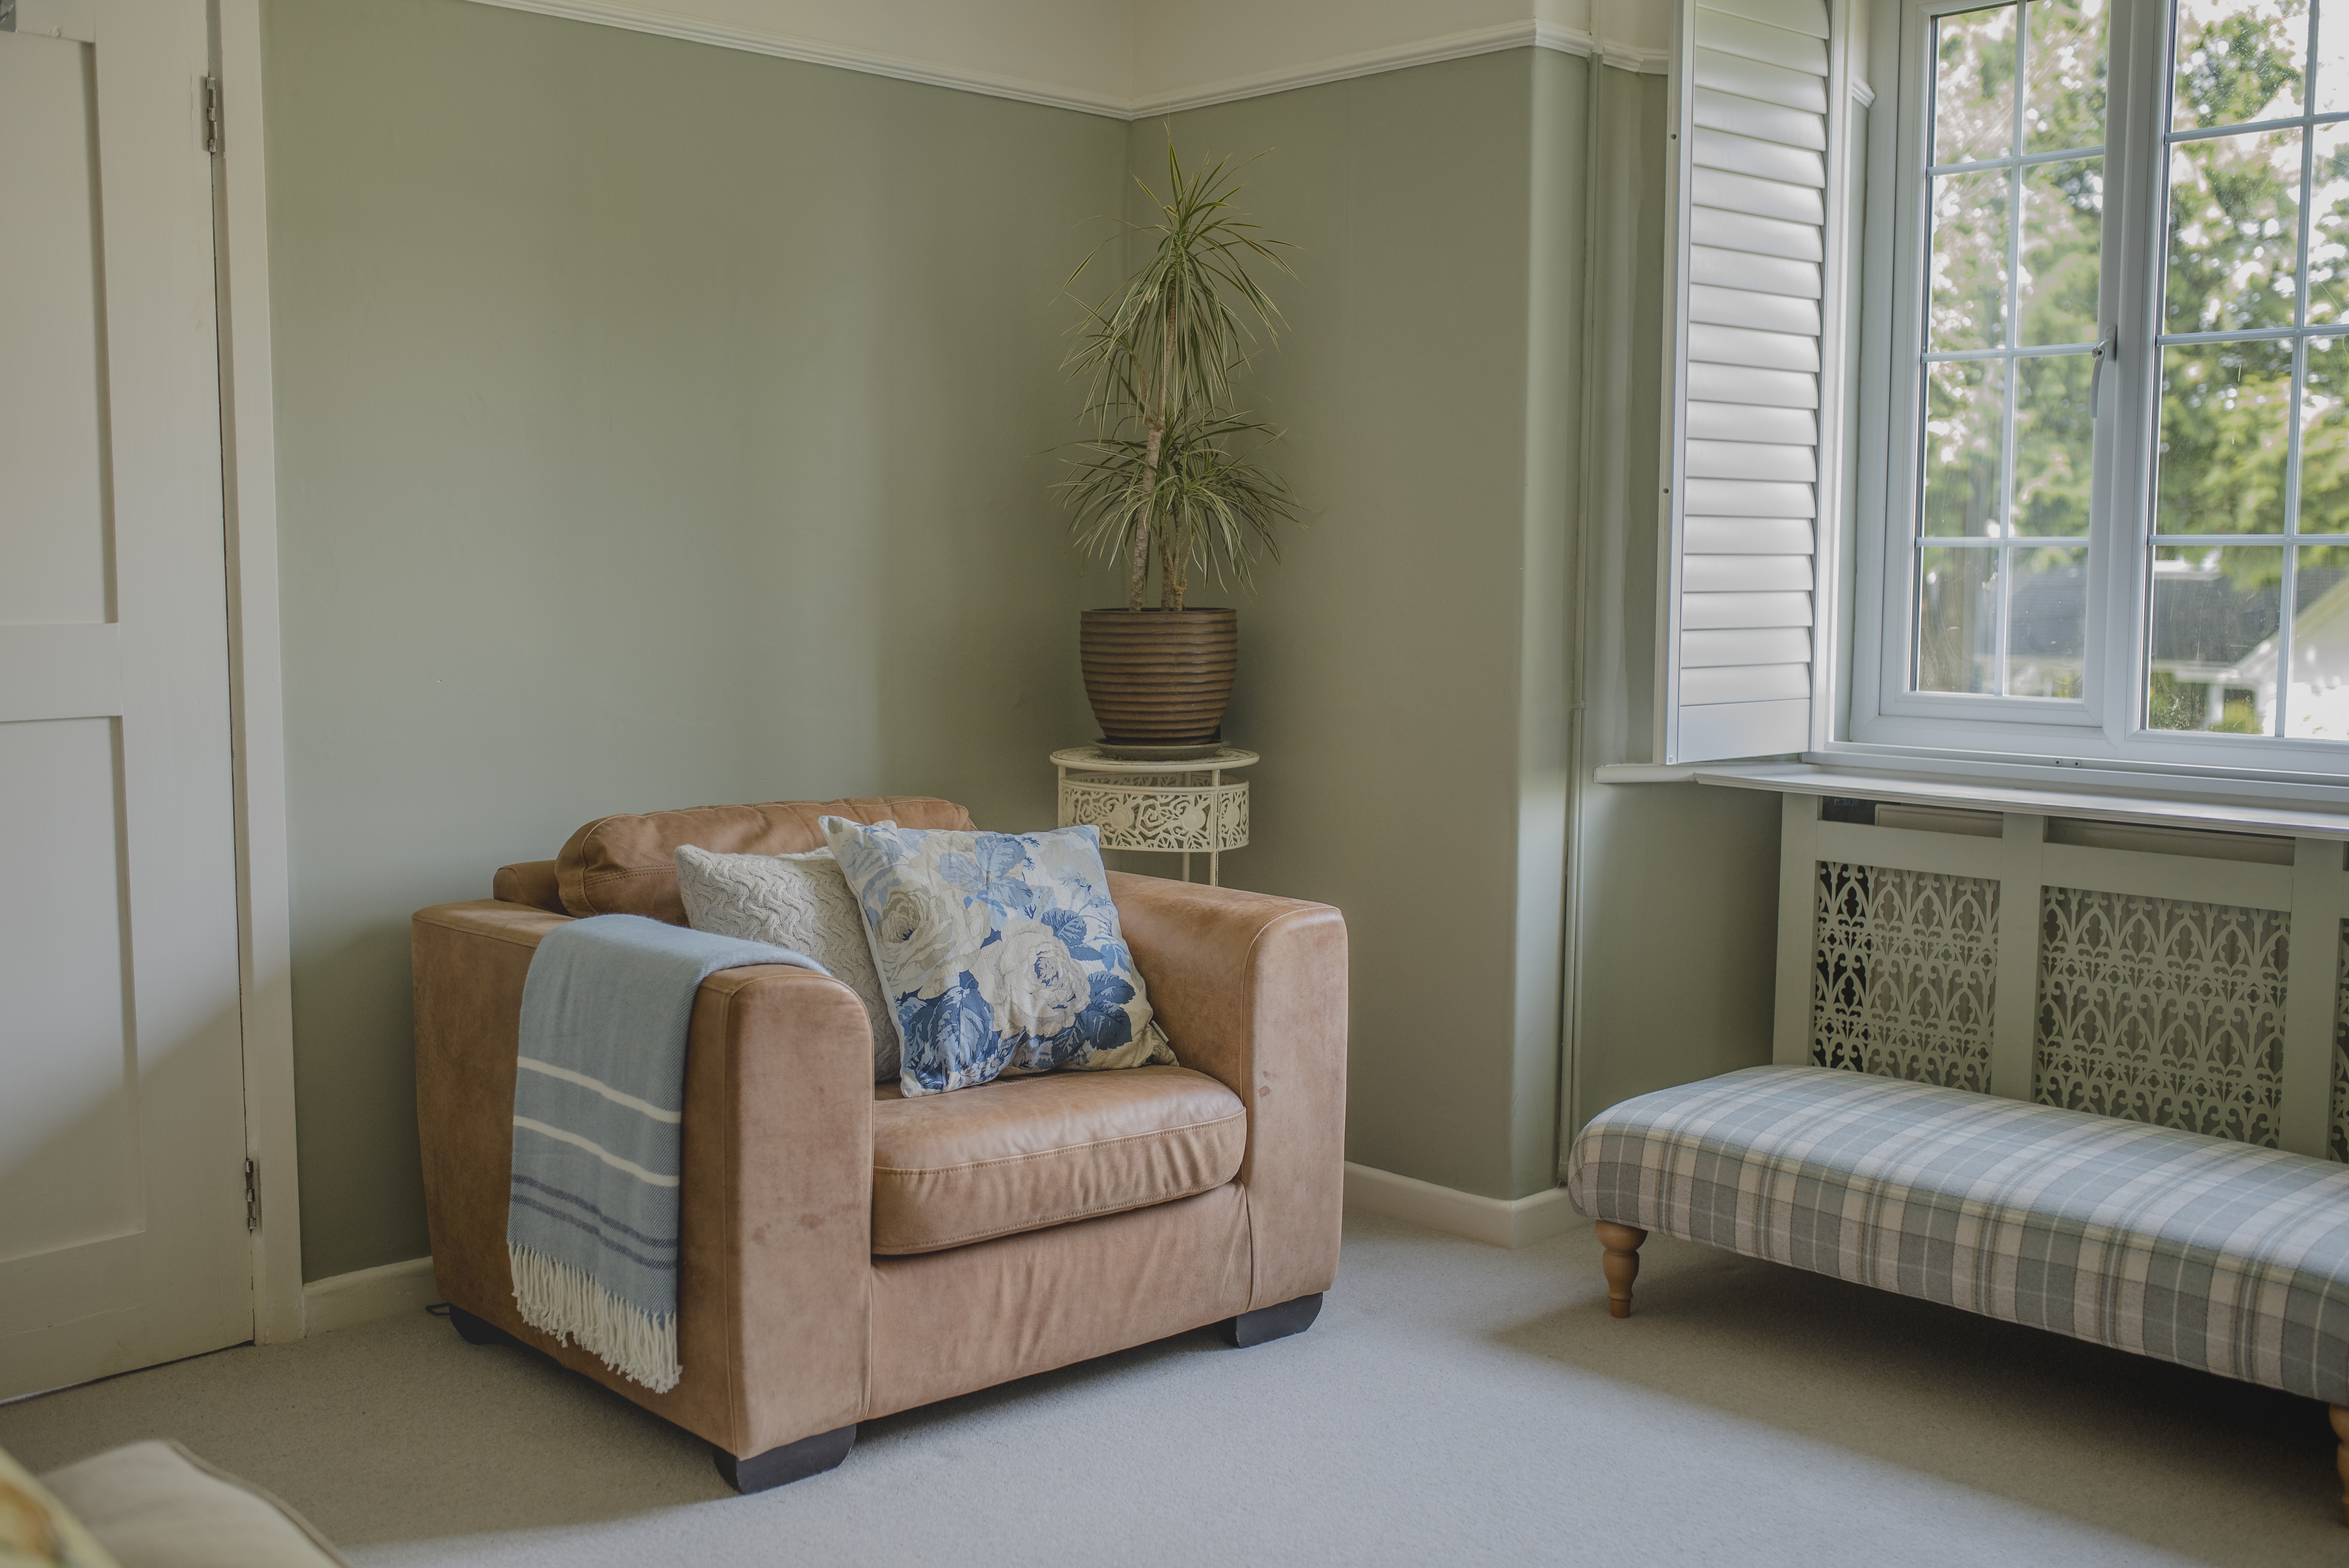 A room painted in a calming soft green colour.